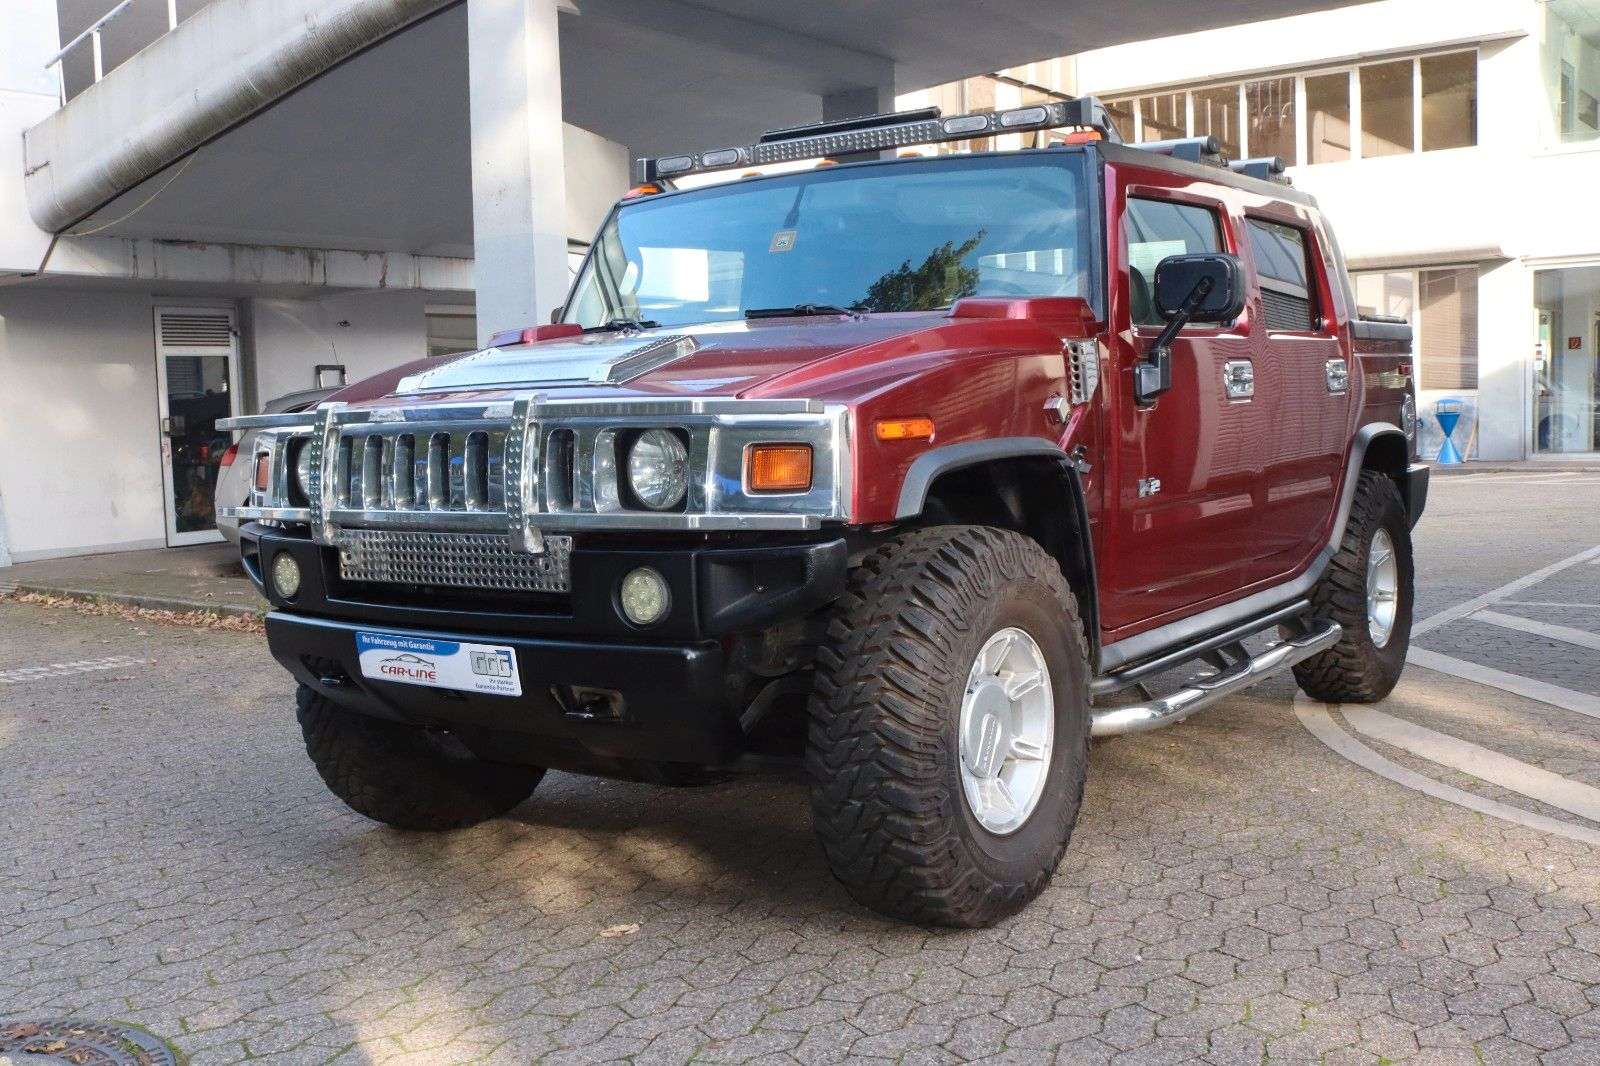 HUMMER H2 Off-Road/Pick-up in Red used in Ratingen for € 27,677.-